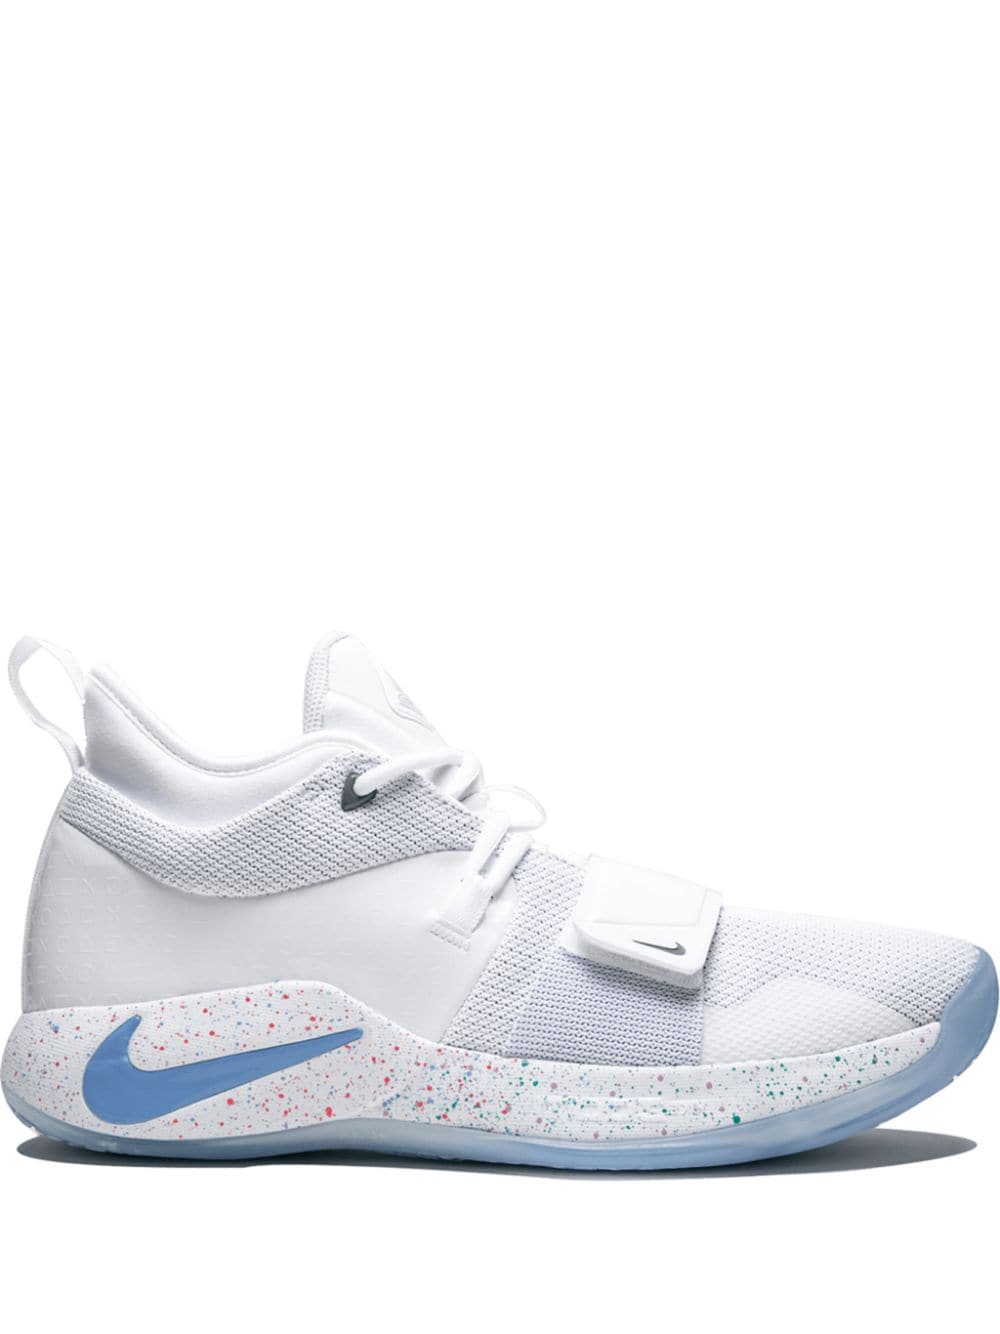 white pg 2.5 playstation